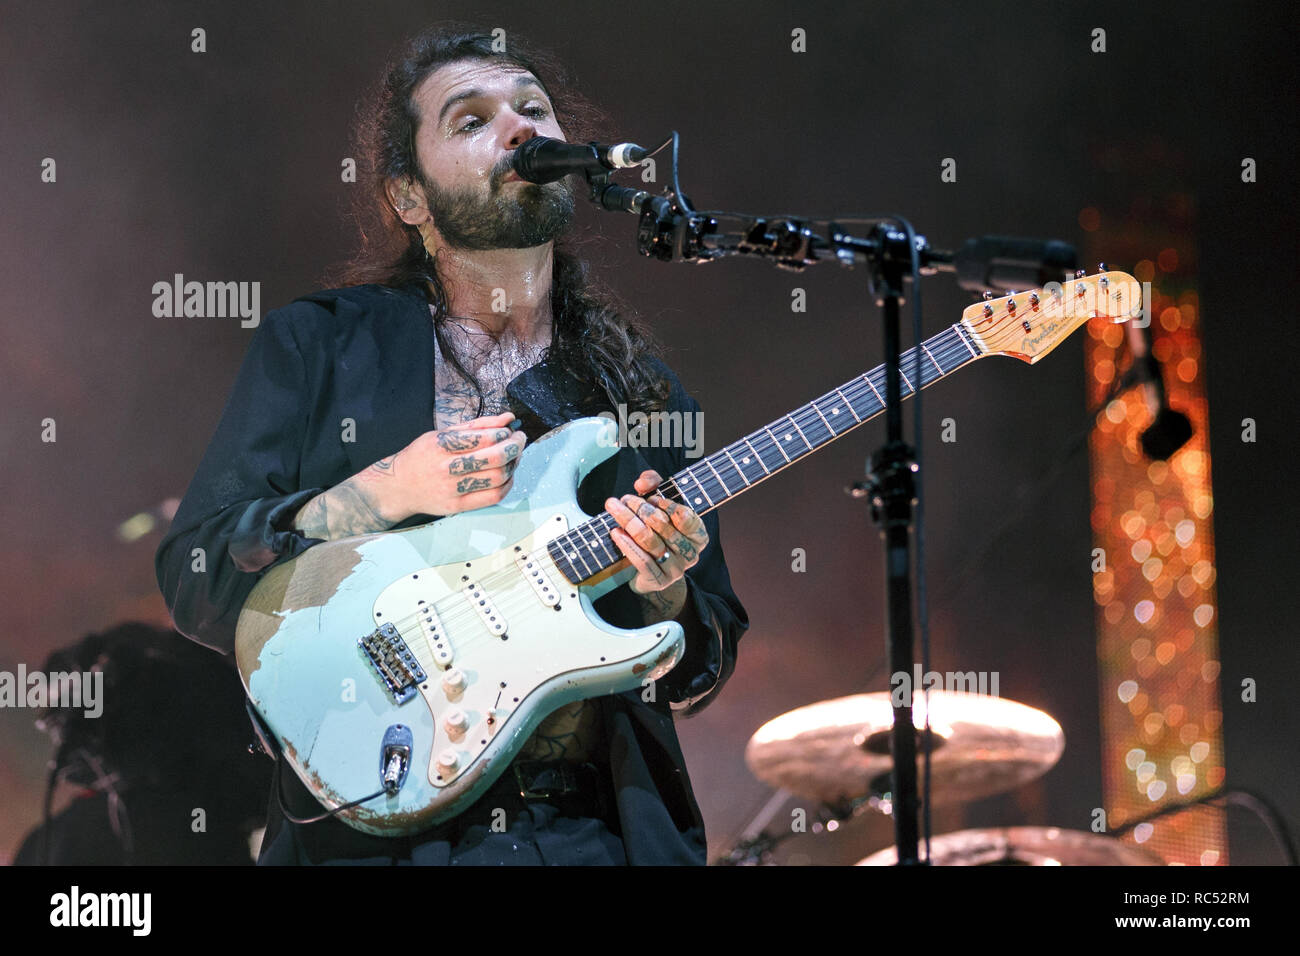 Simon Neil of Biffy Clyro onstage playing a worn Fender Stratocaster at a music festival. Stratocaster guitar, Fender Strat, Biffy Clyro lead singer. Stock Photo